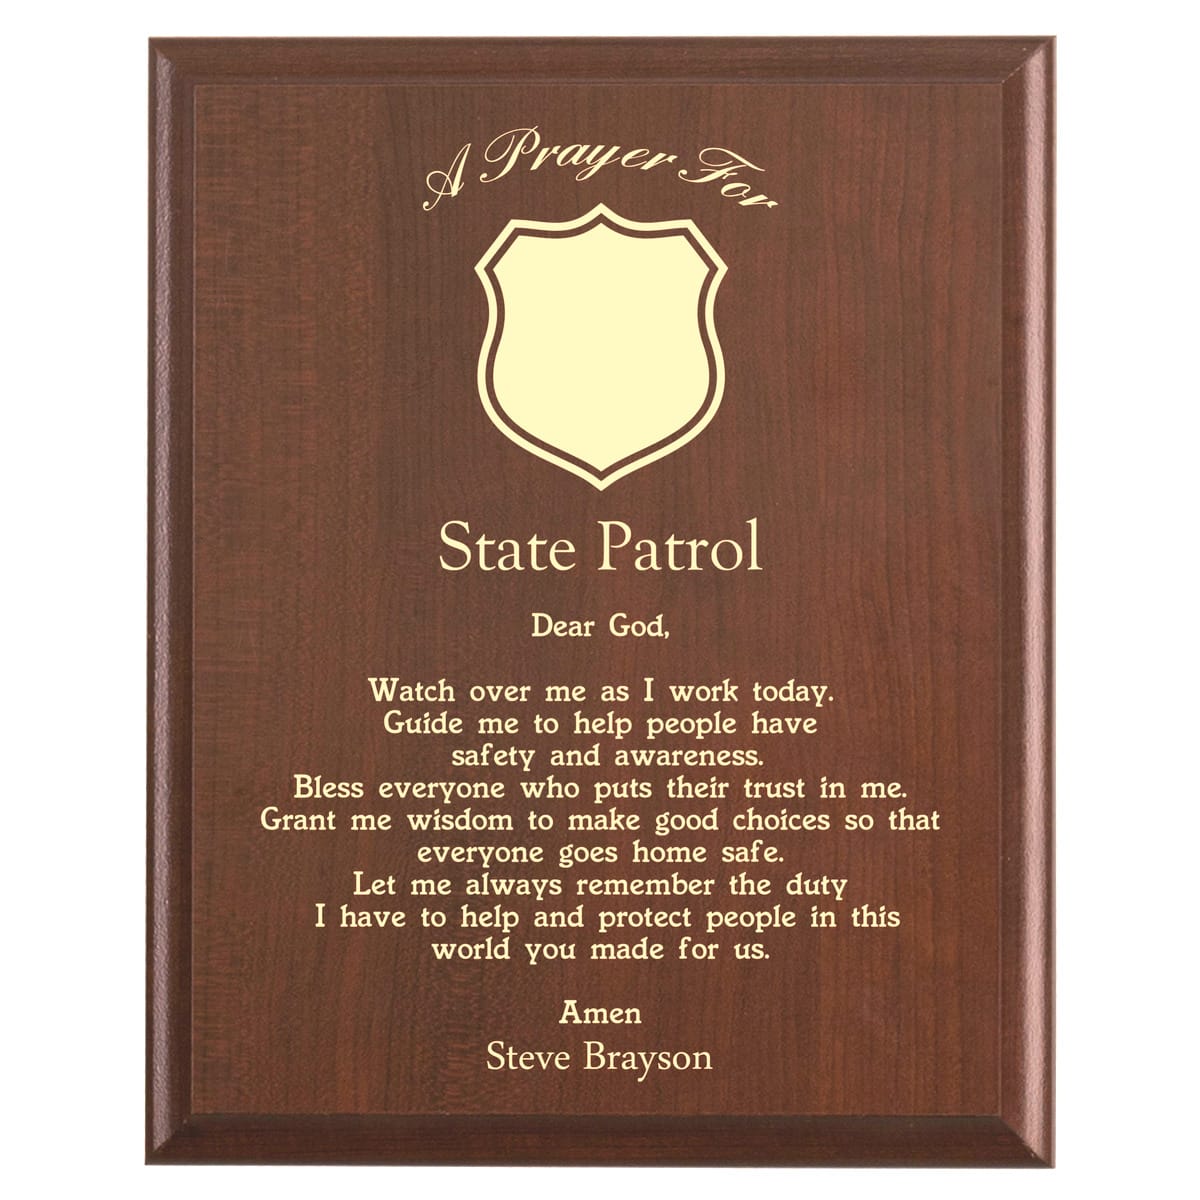 Plaque photo: State Patrol Prayer Plaque design with free personalization. Wood style finish with customized text.